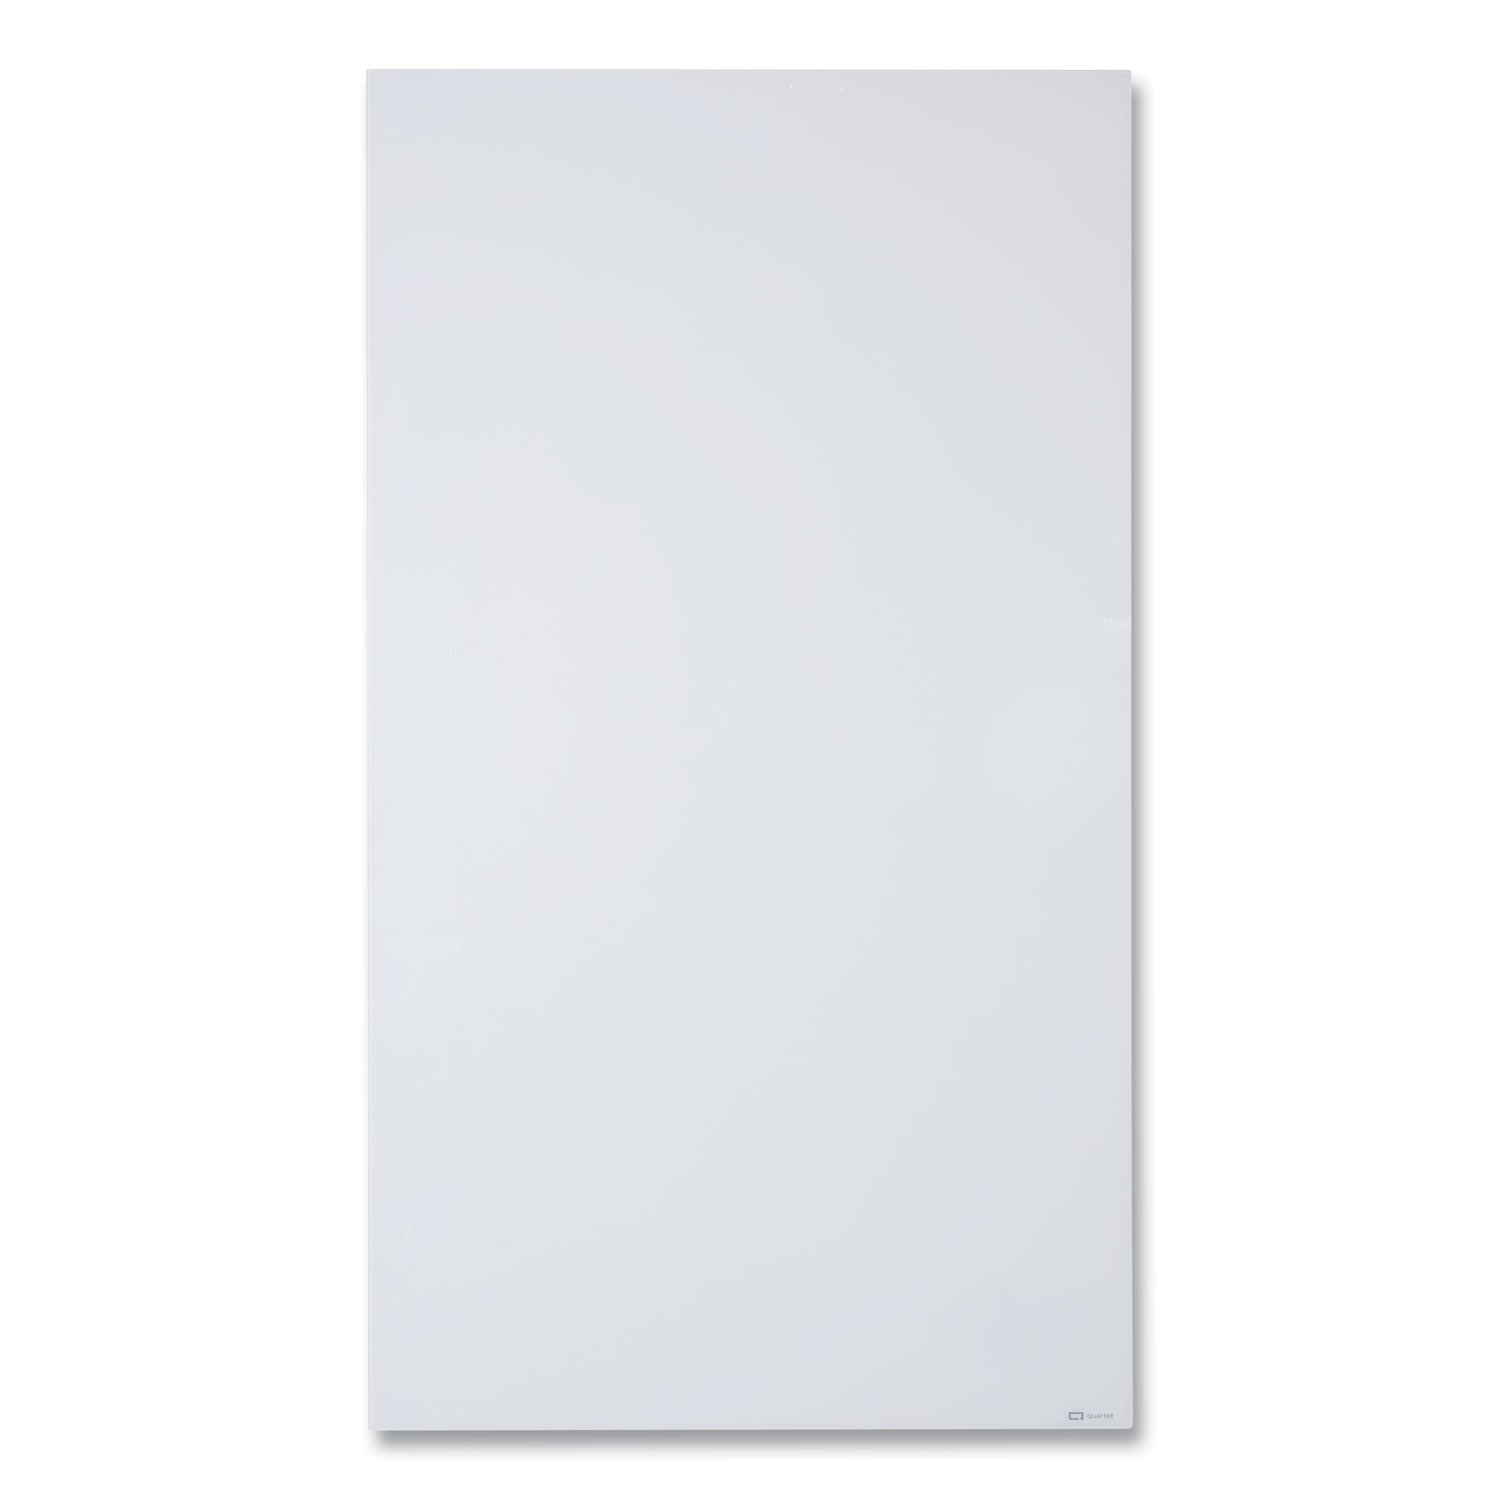 invisamount-vertical-magnetic-glass-dry-erase-boards-42-x-74-white-surface_qrtq014274imw - 1